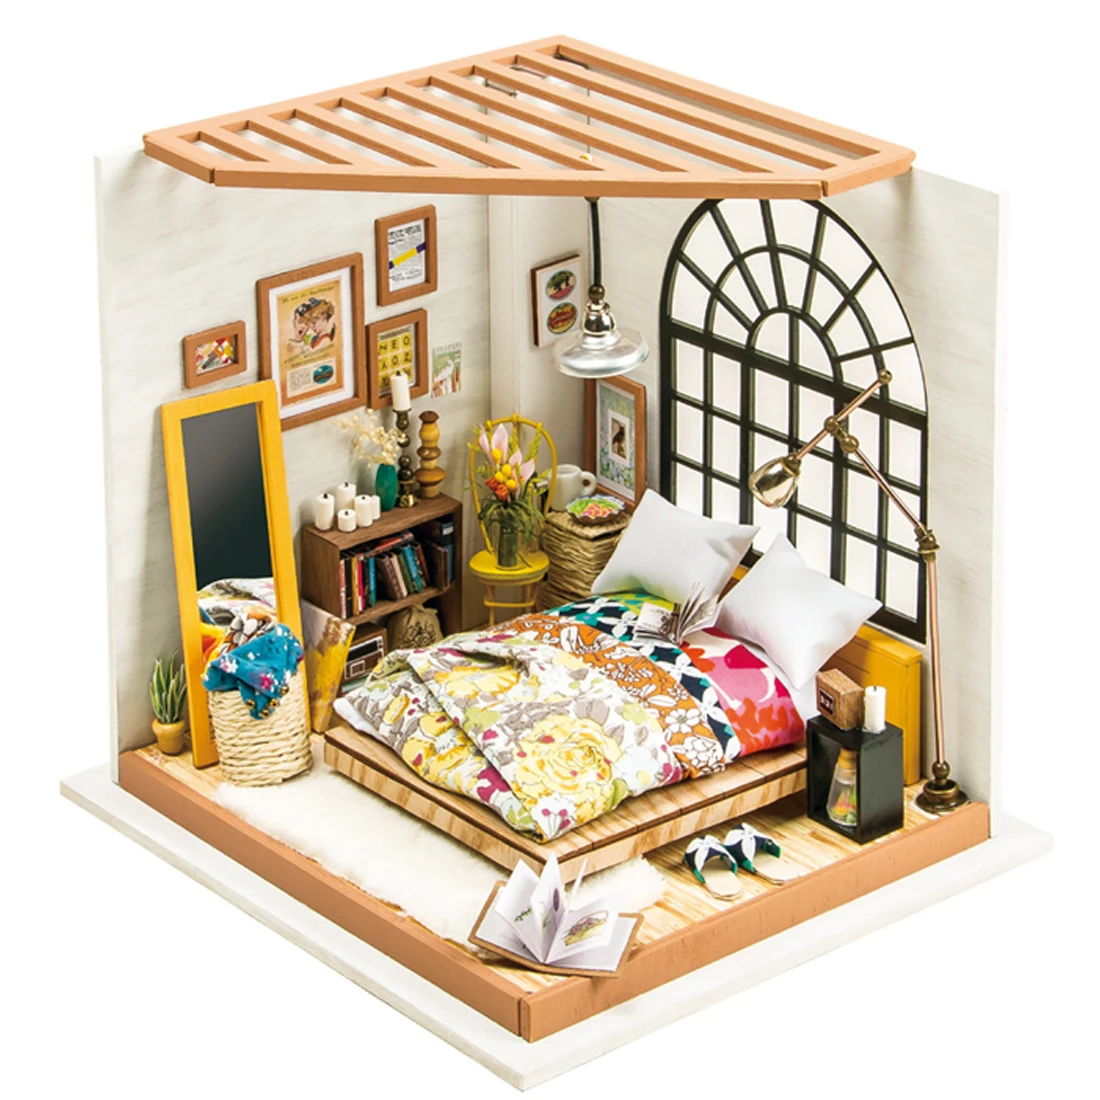 

Robotime Manual Assembly DIY Dollhouse Alice's Dreamy Bedroom with LED Light Stem Toys for Home Decoraction